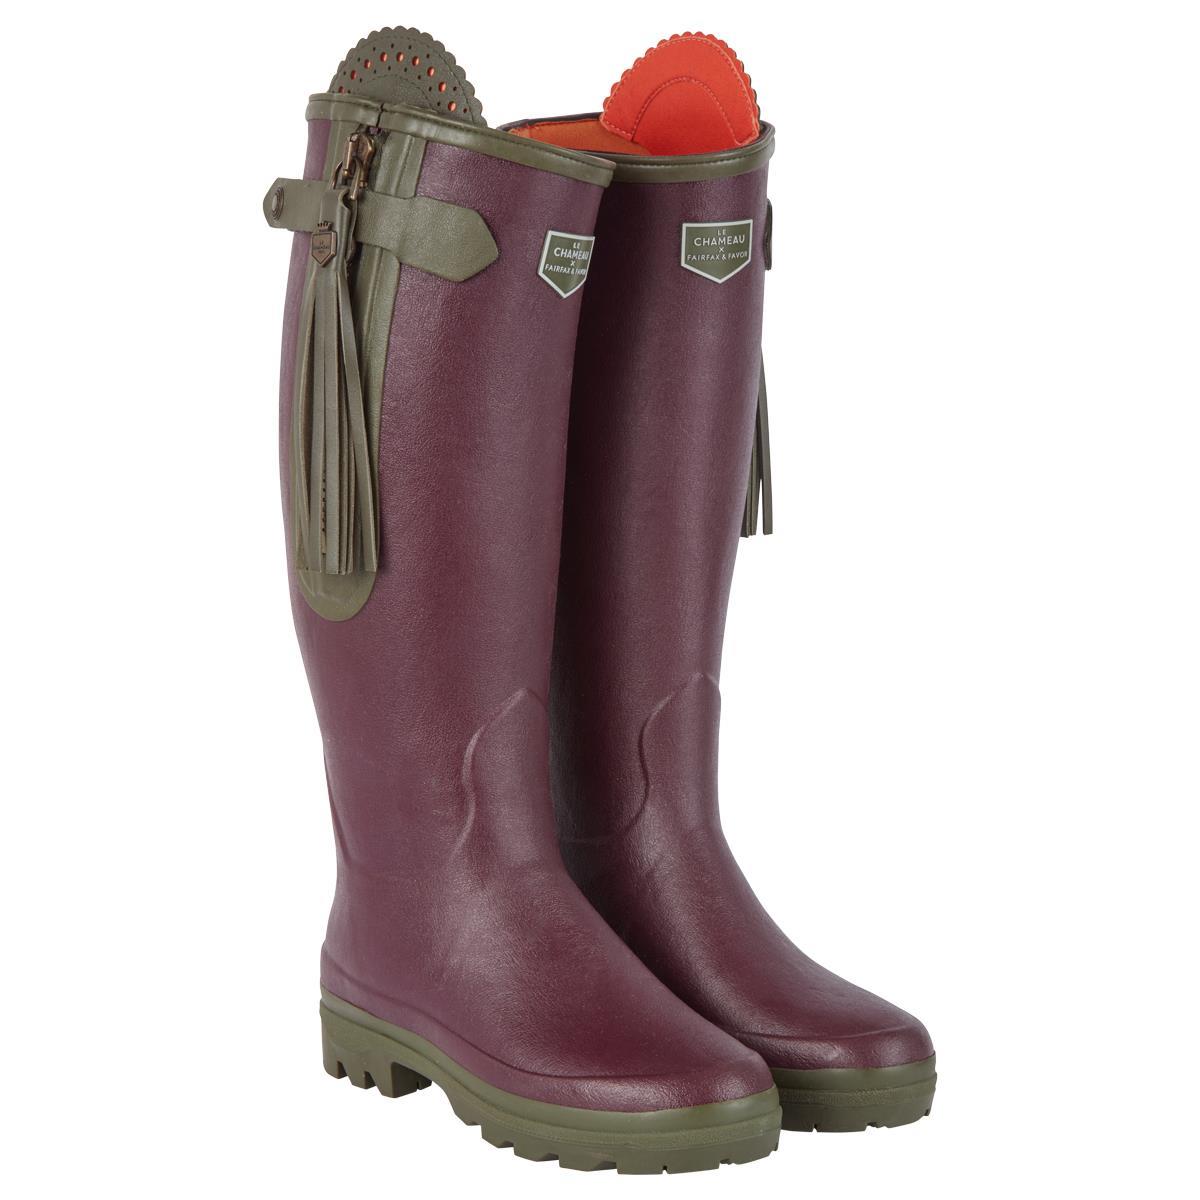 What are the specs of the Le Chameau x Fairfax & Favor L'Alliance Neo Boots fairfax and favour wellies?